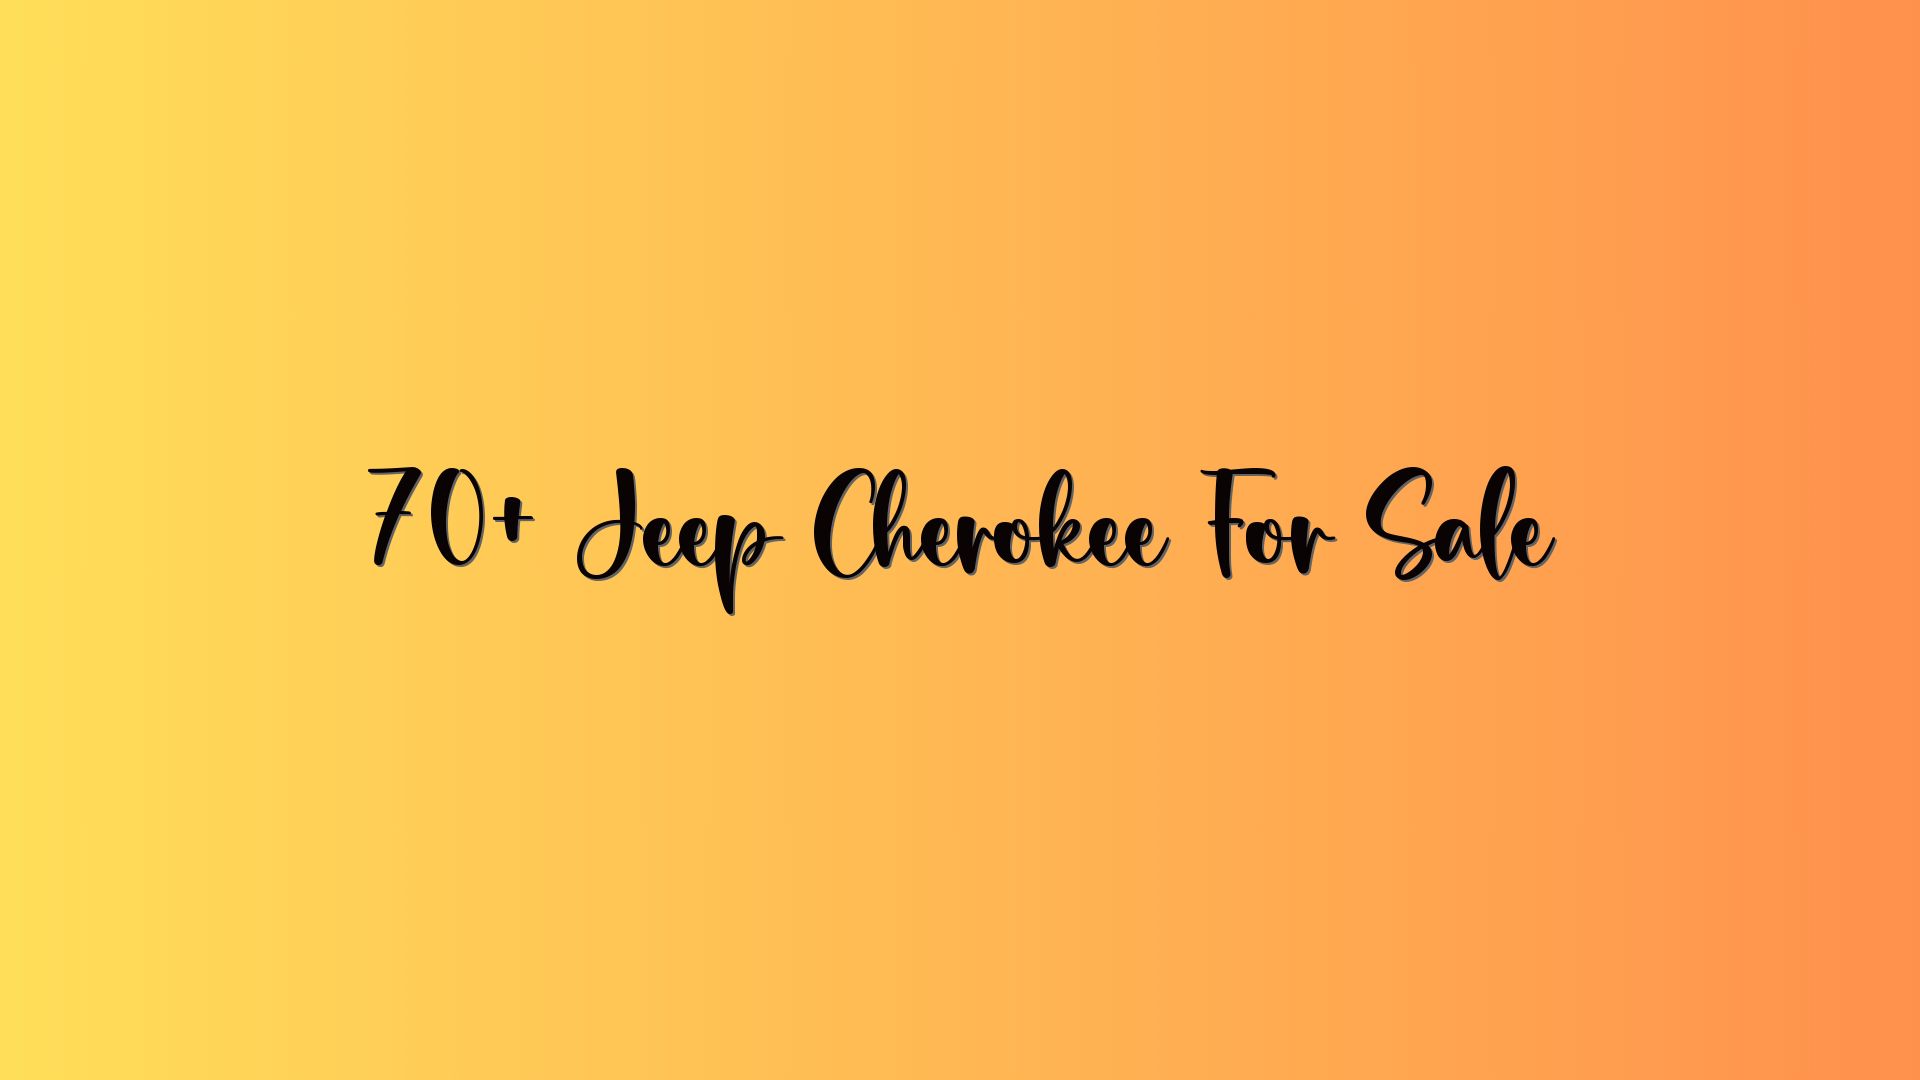 70+ Jeep Cherokee For Sale